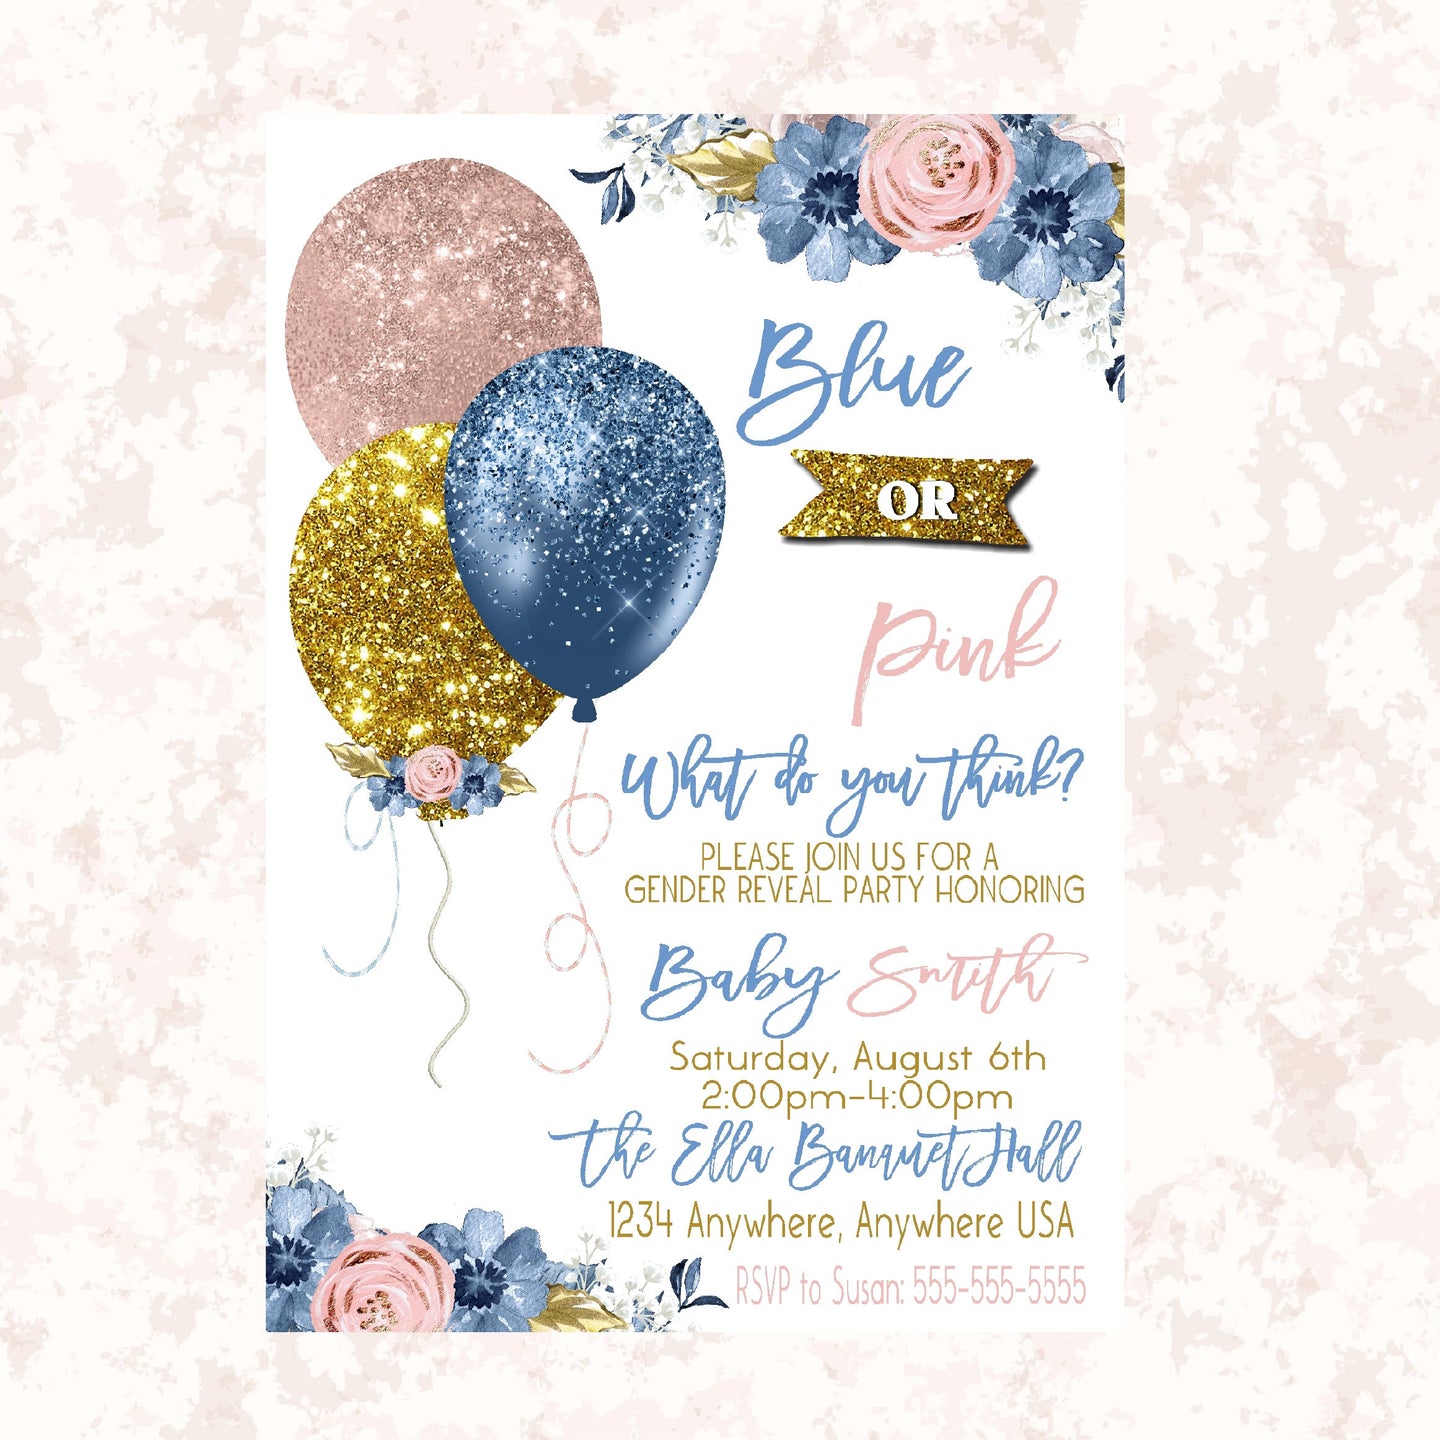 Blue or pink  Balloon Gender Reveal  Invitation, Boy or girl, He or sheBaby shower, Invitation printable dusty blue blush pink gold Glitter